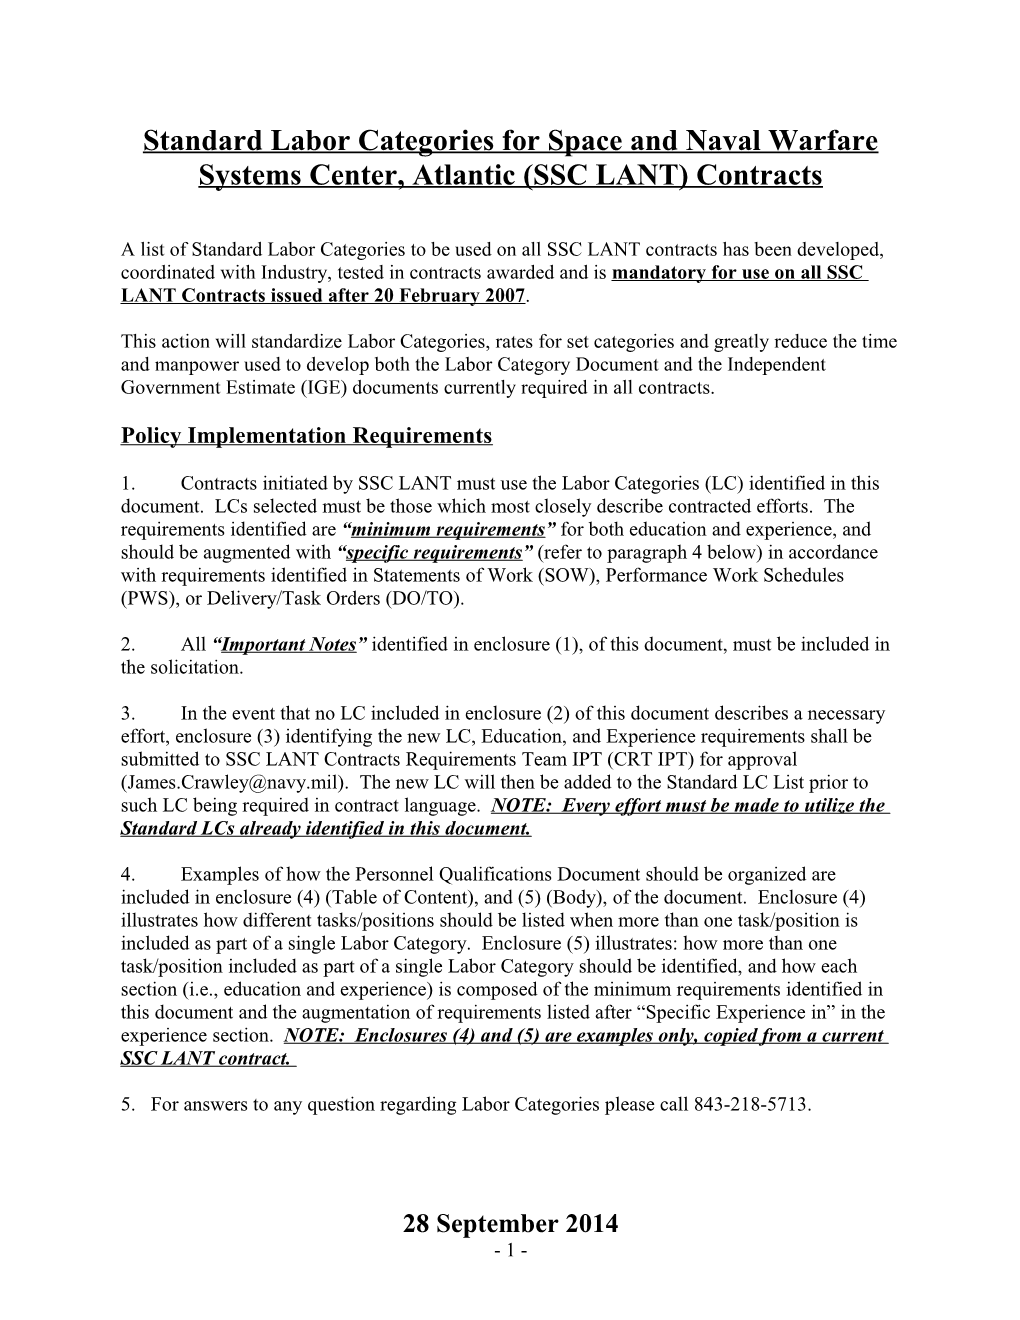 Standard Labor Categories for Space and Naval Warfare Systems Center, Atlantic (SSC LANT)